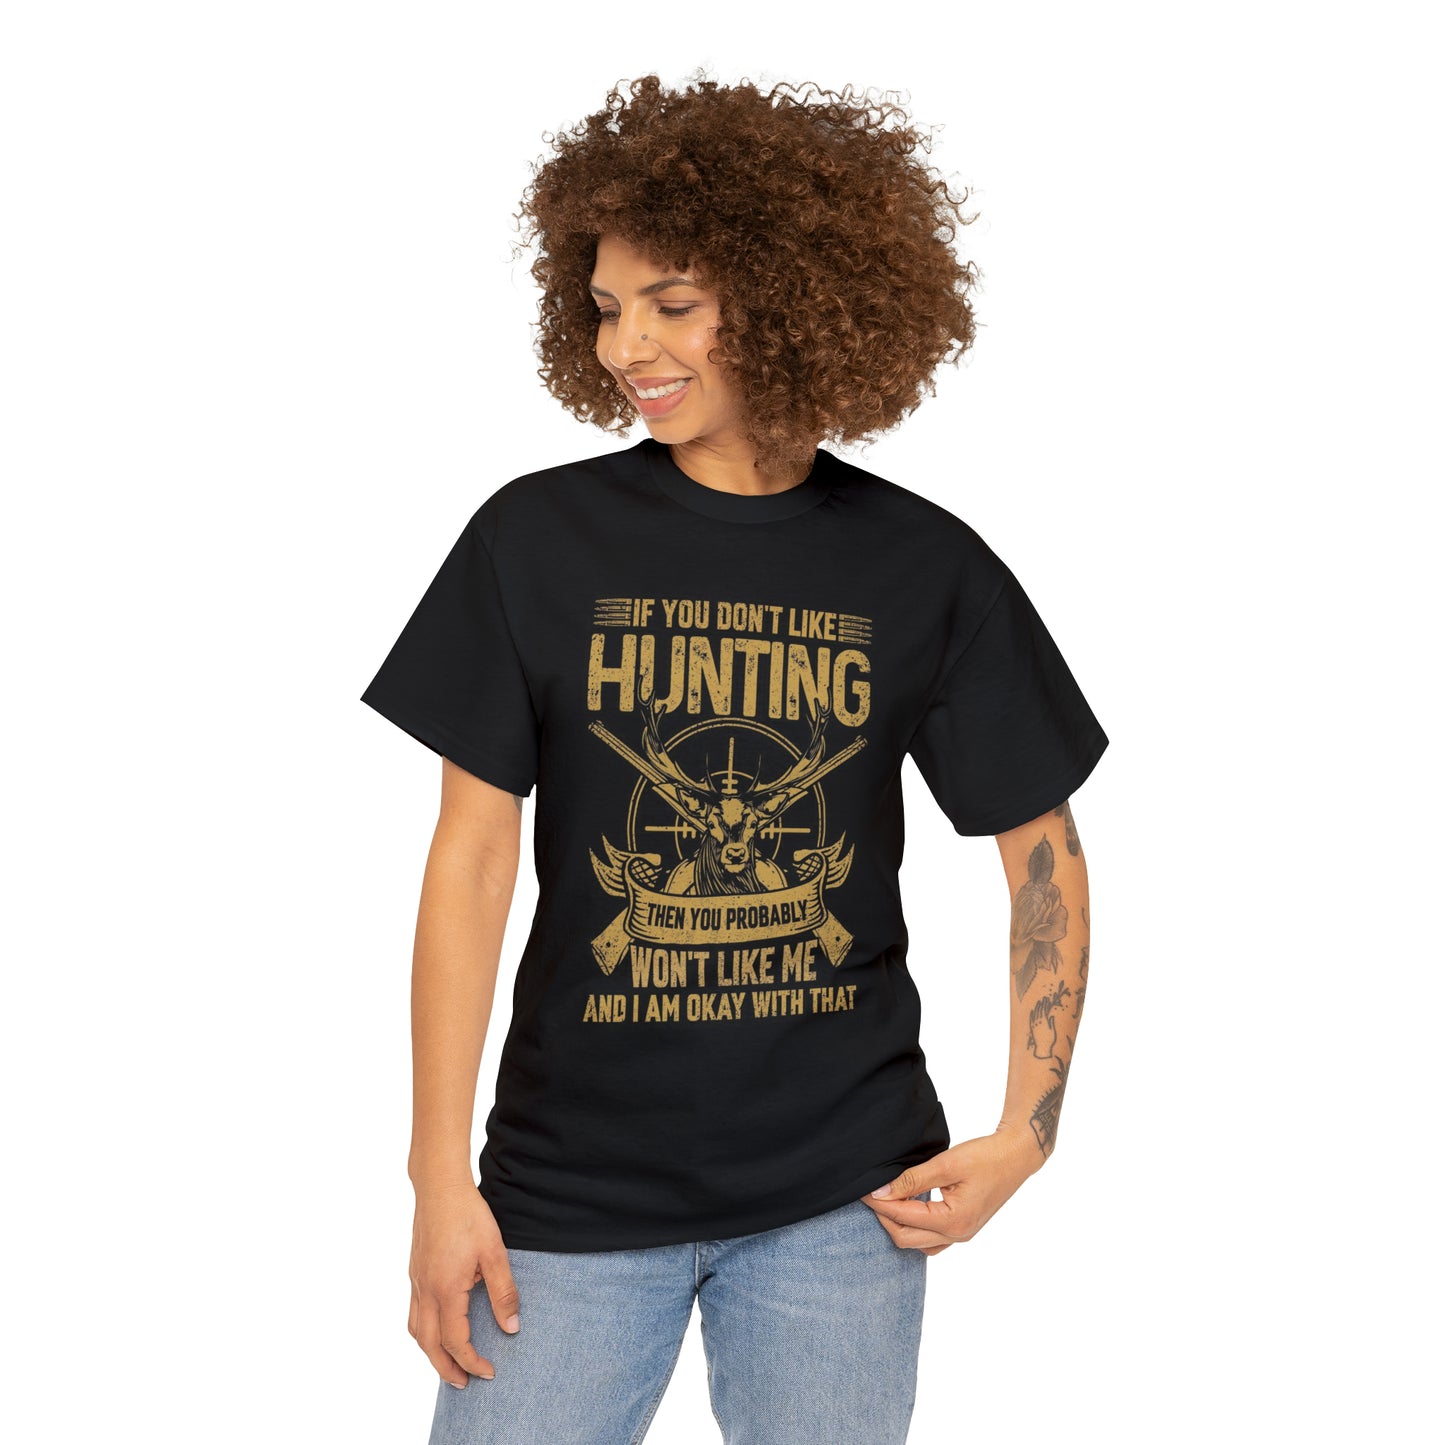 If you don’t like hunting you won’t like me- Heavy Cotton Tee